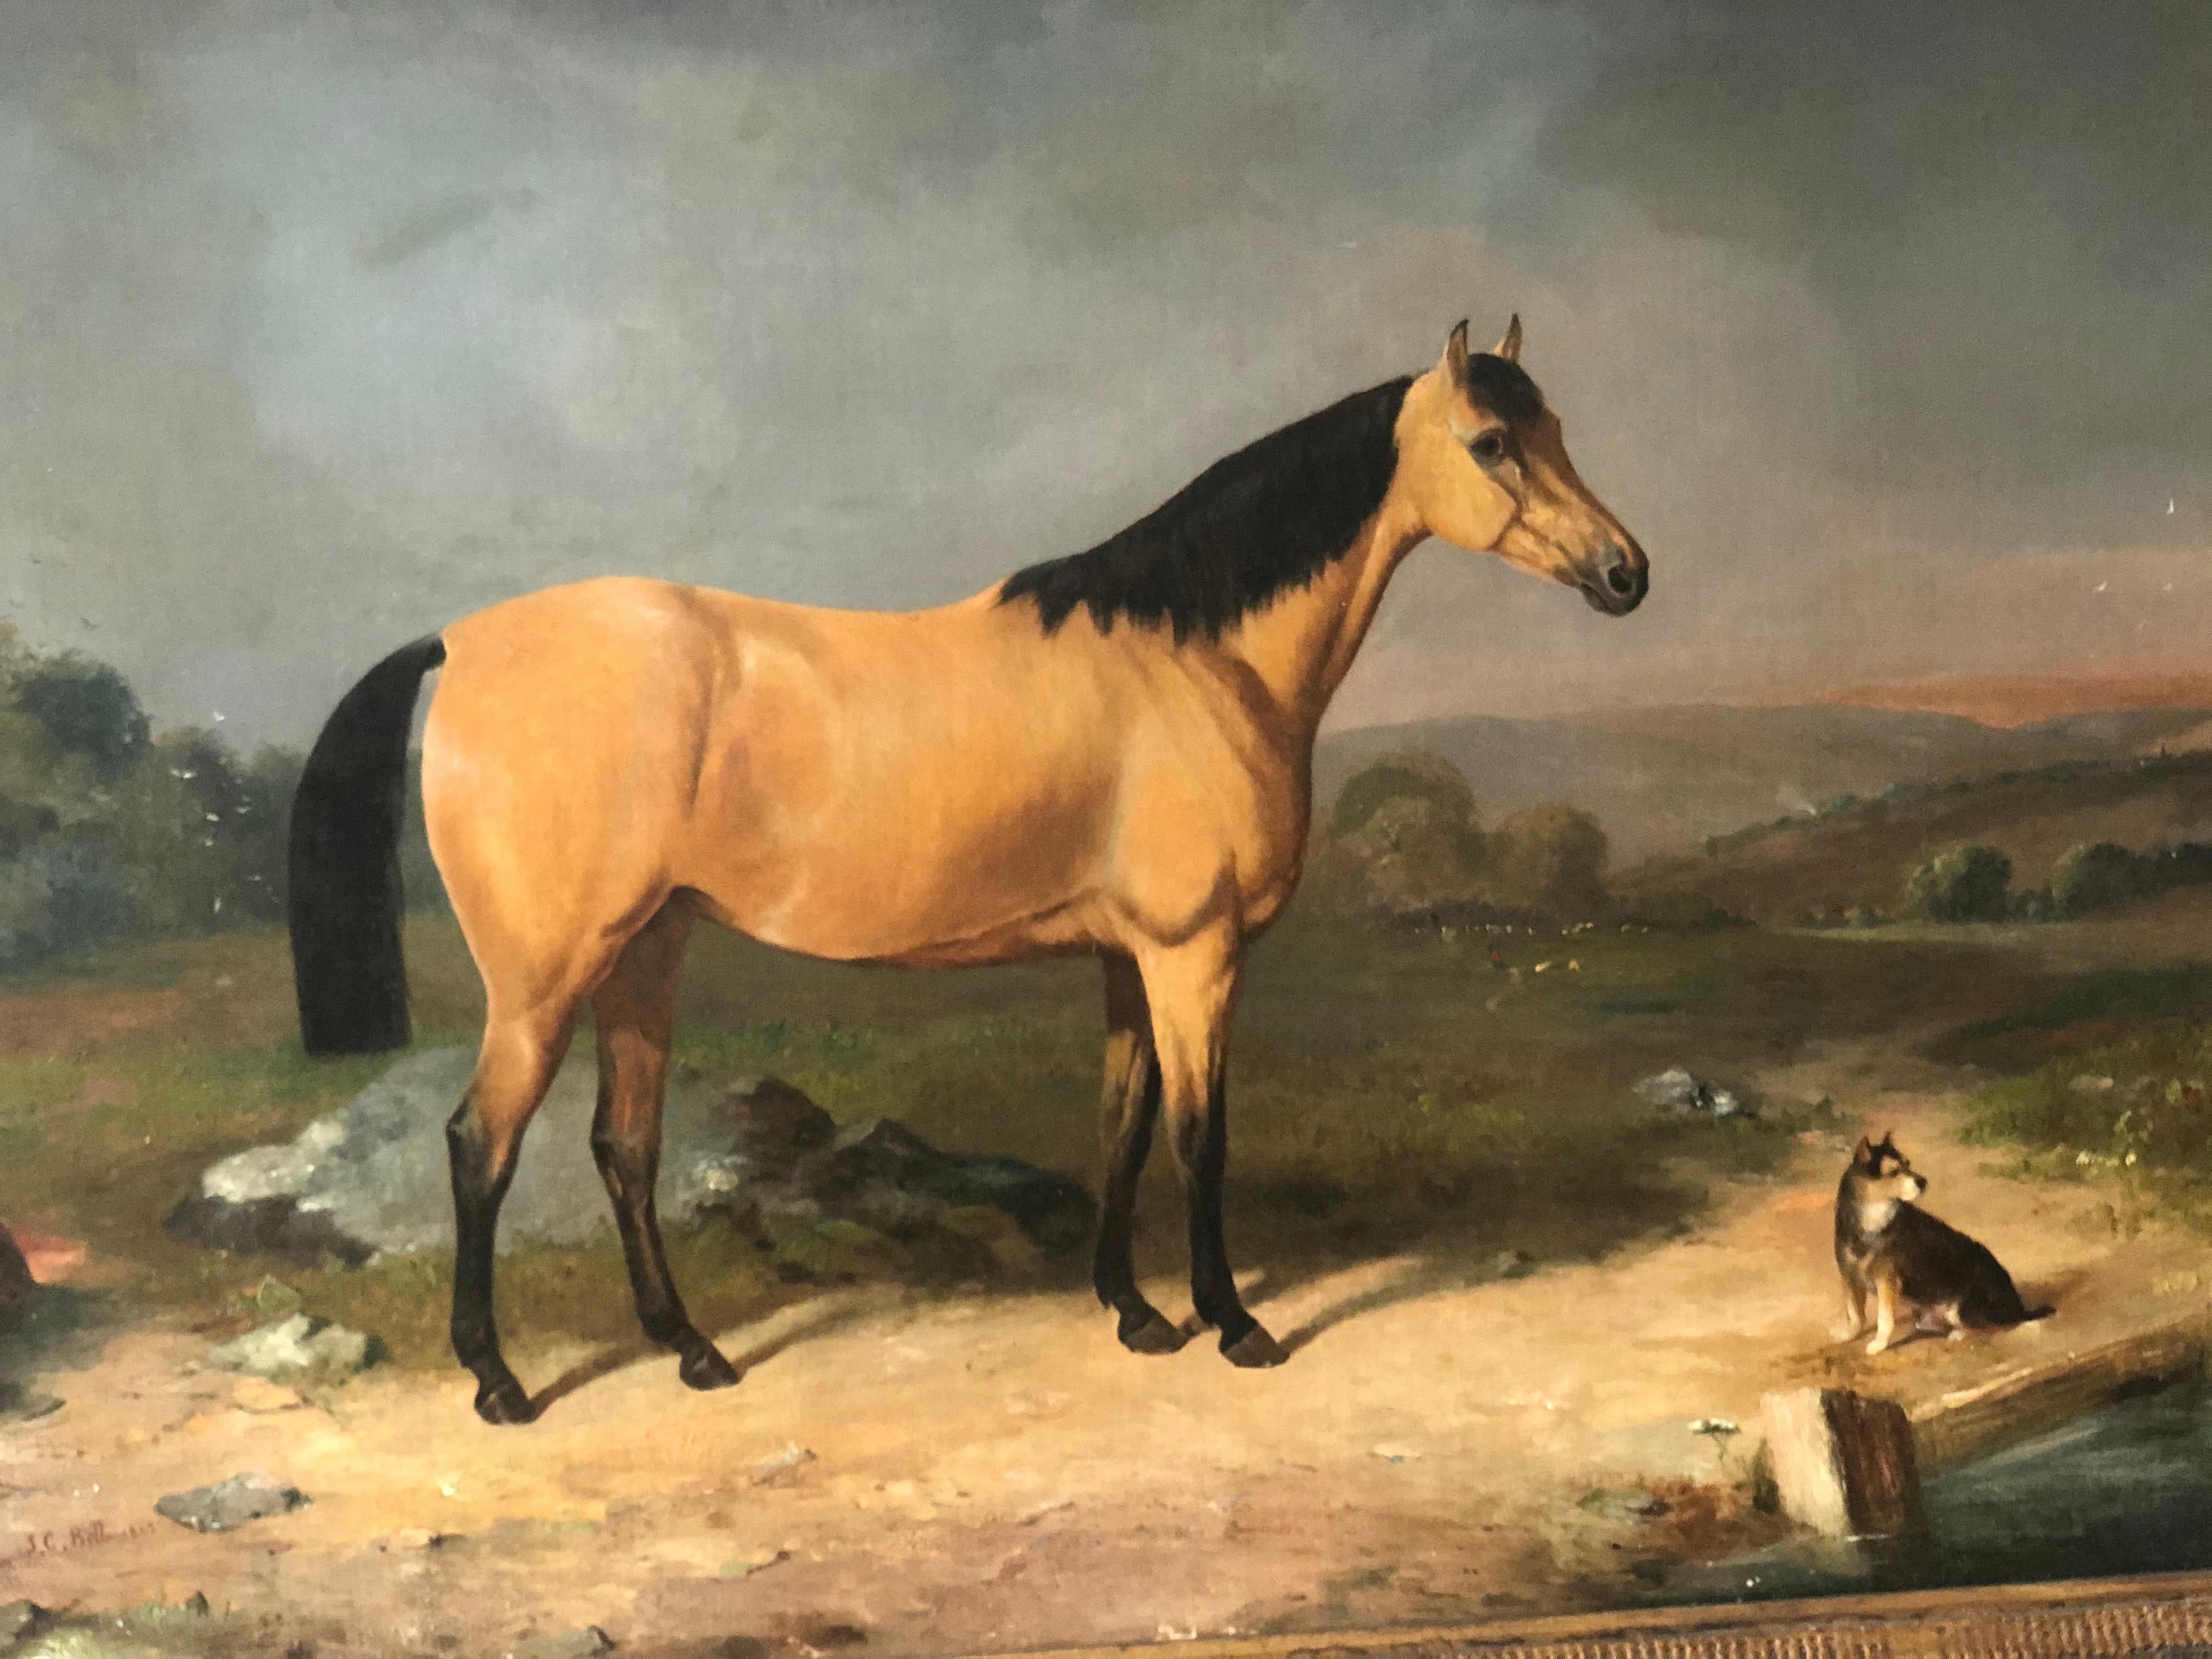  Horse Portrait With A Dog In The Landscape - Painting by John Christopher Bell